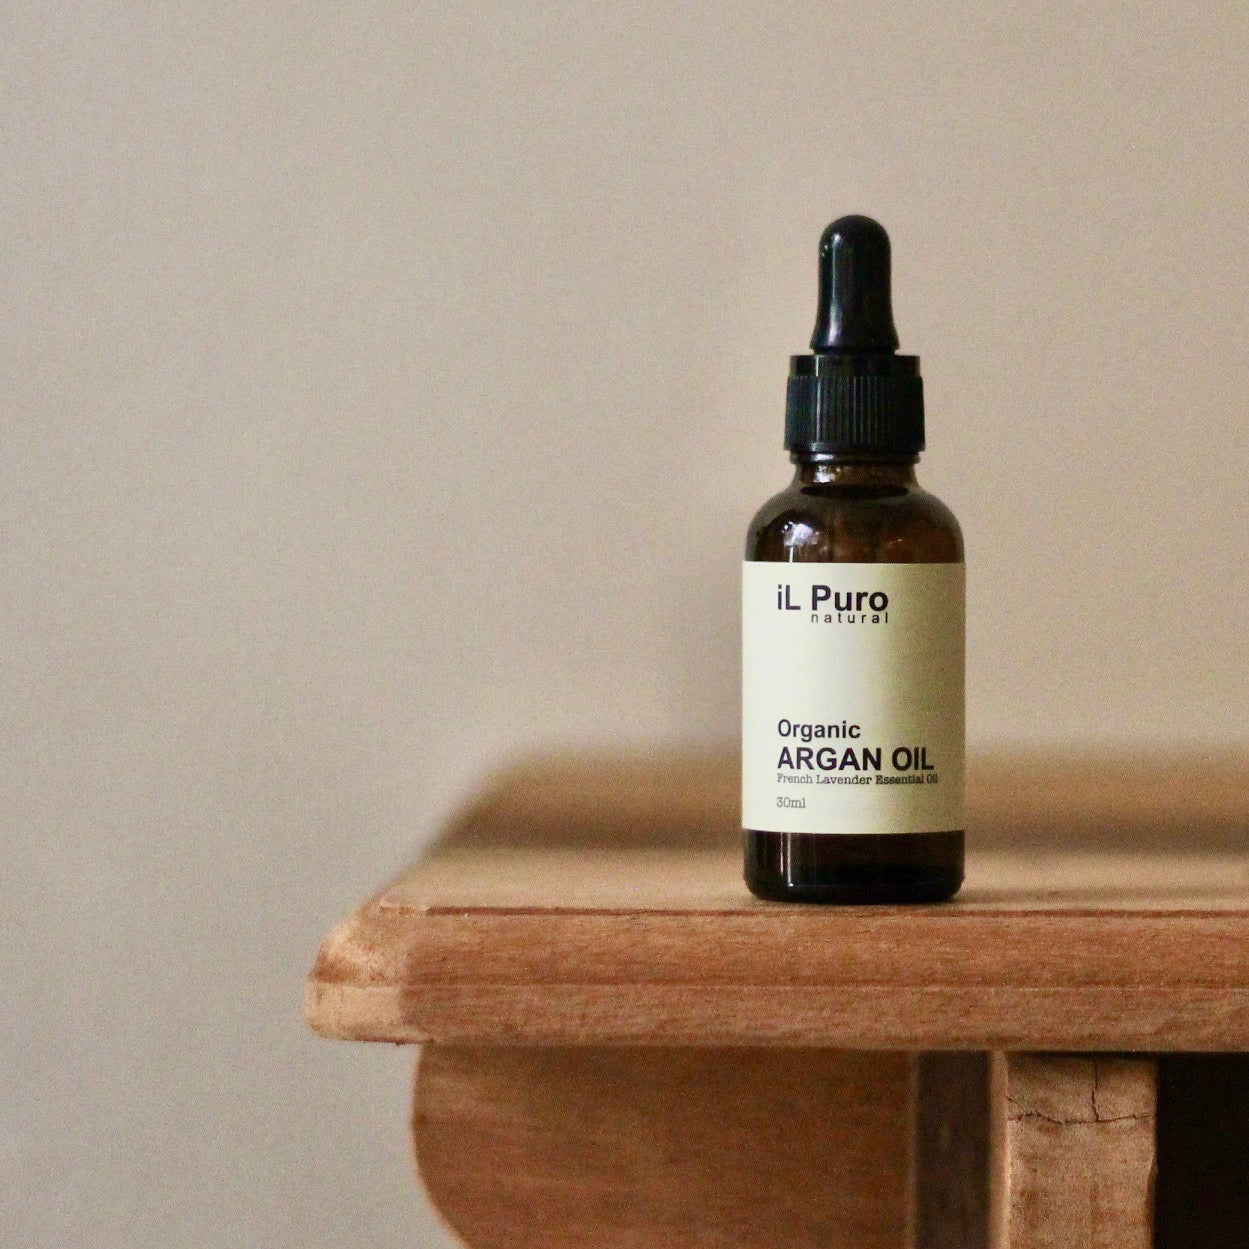 Organic Argan Oil with French Lavender essential oil